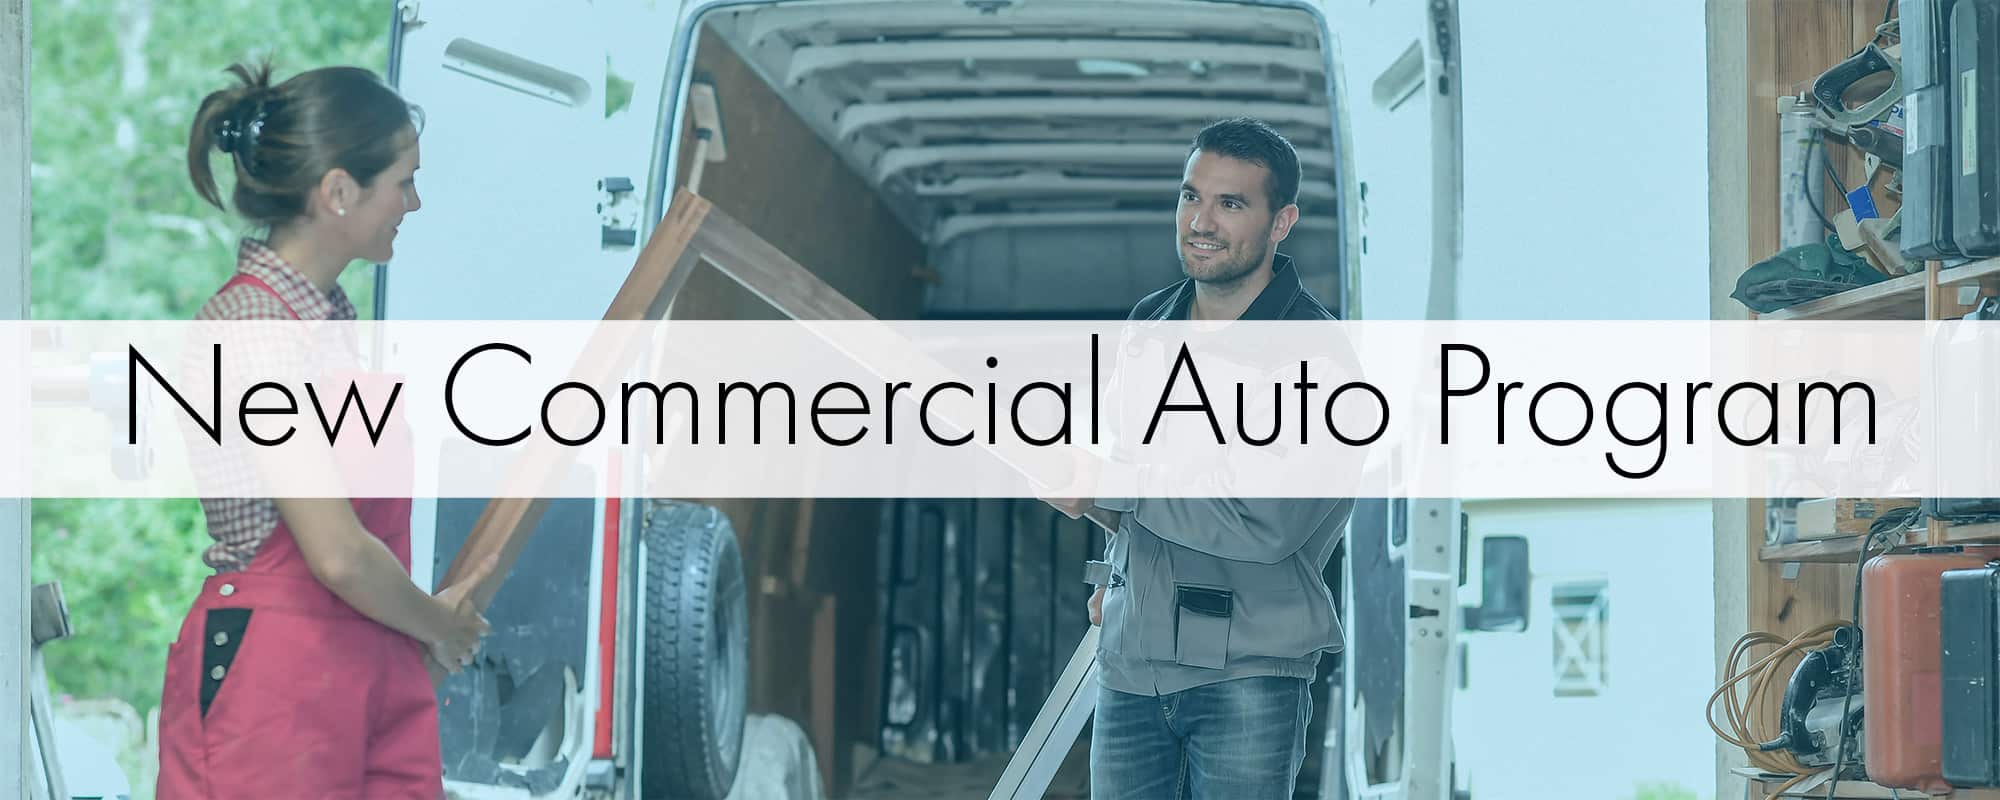 Featured image for “New Commercial Auto Program”